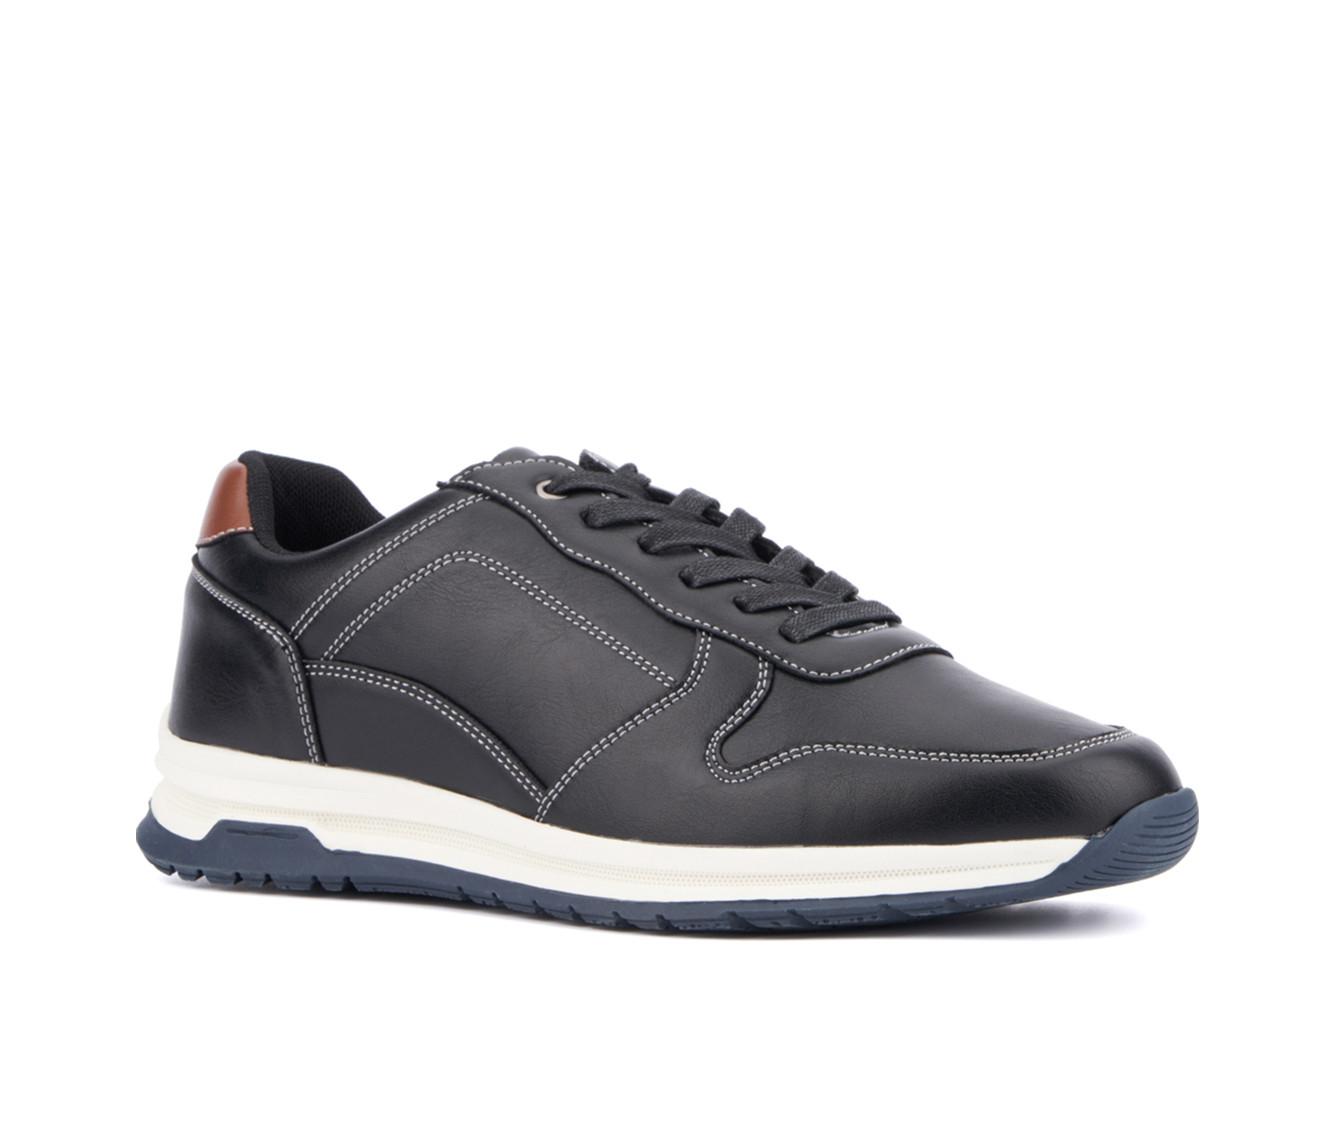 Men's New York and Company Haskel Casual Oxfords